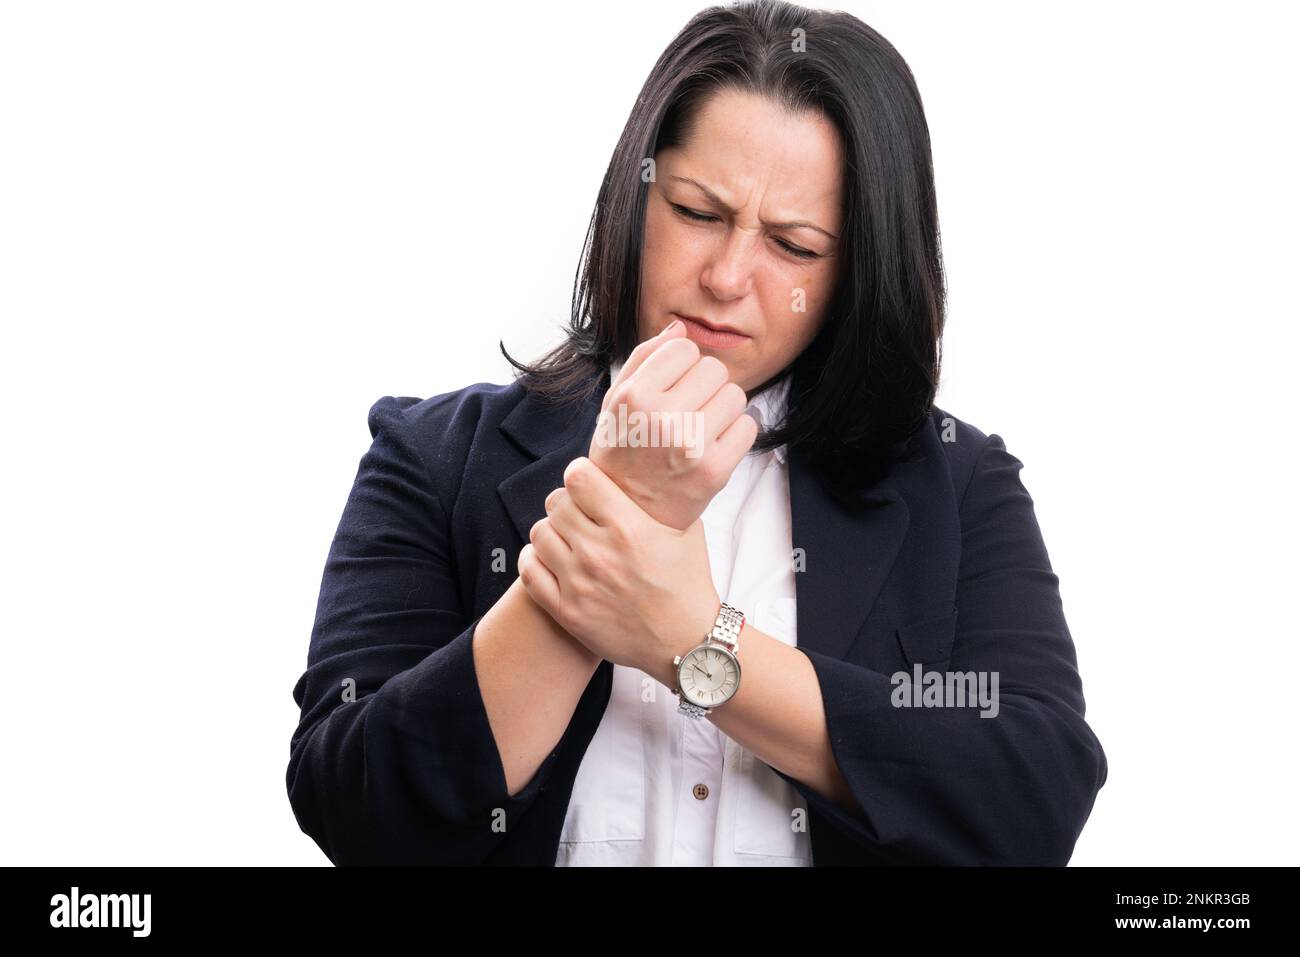 Adult businesswoman with hurting expression in formalwear touching painful sprained wrist articulation isolate on white studio background Stock Photo